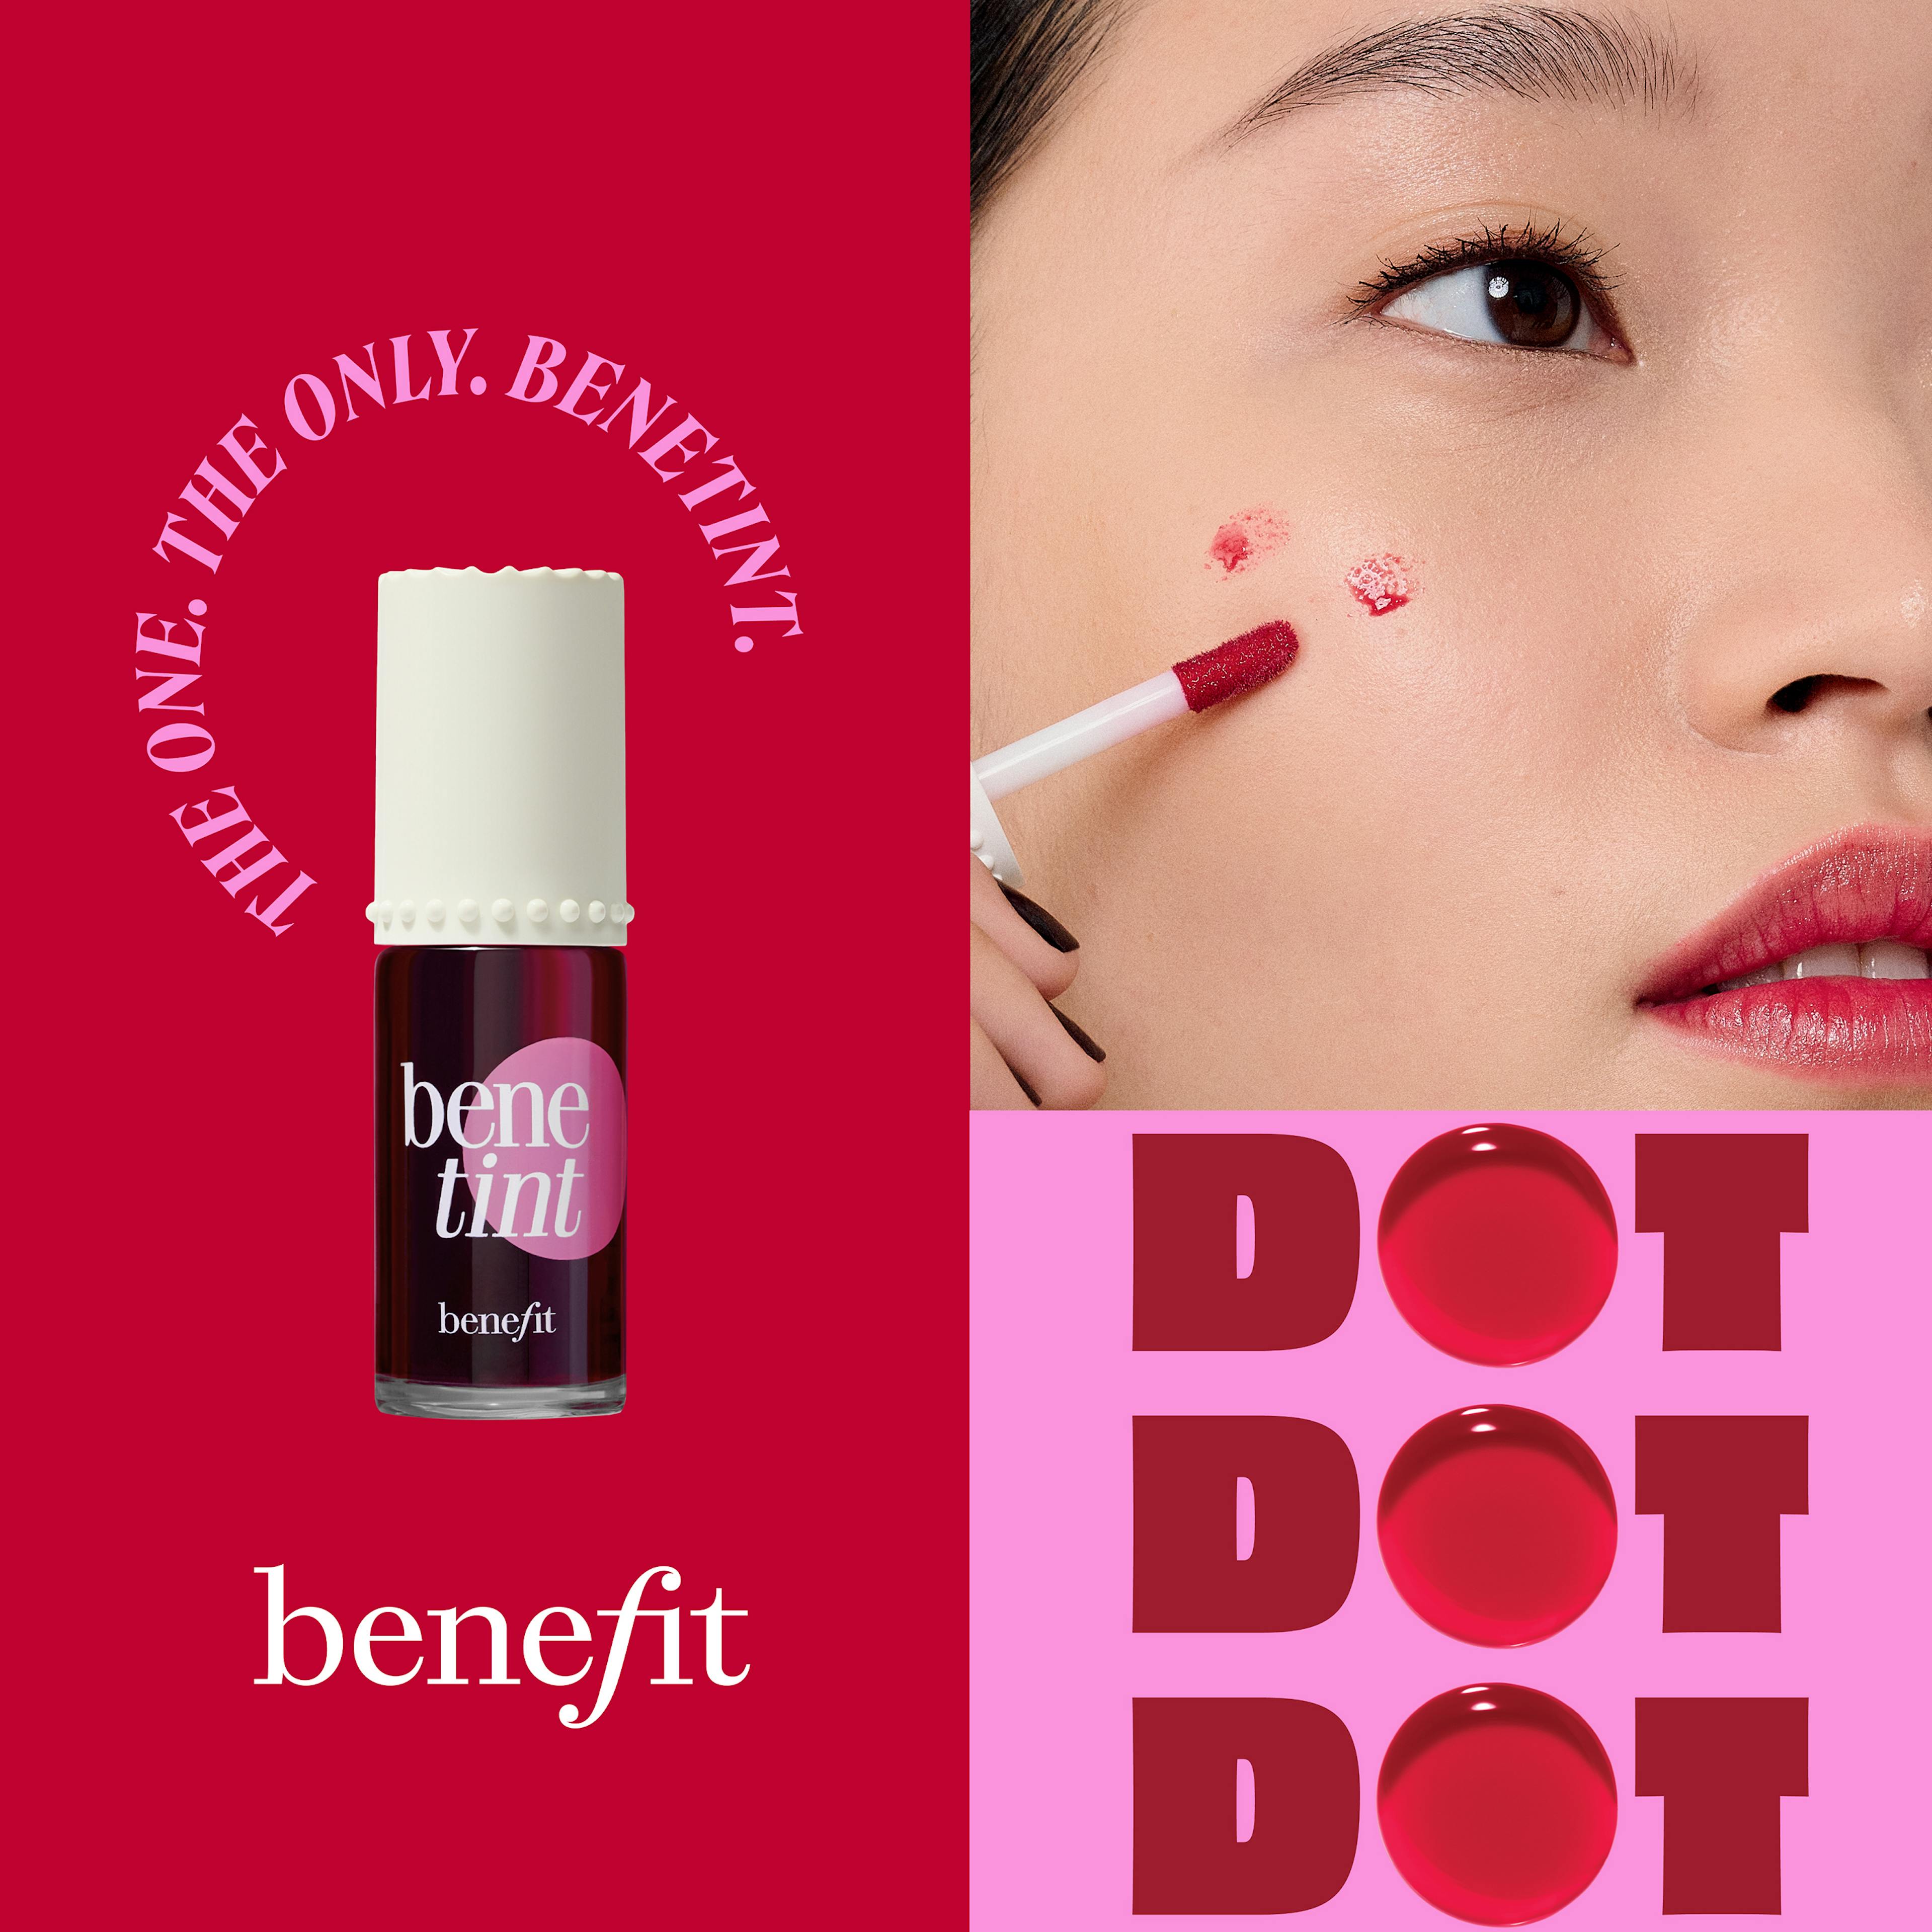 The iconic product : the Benetint